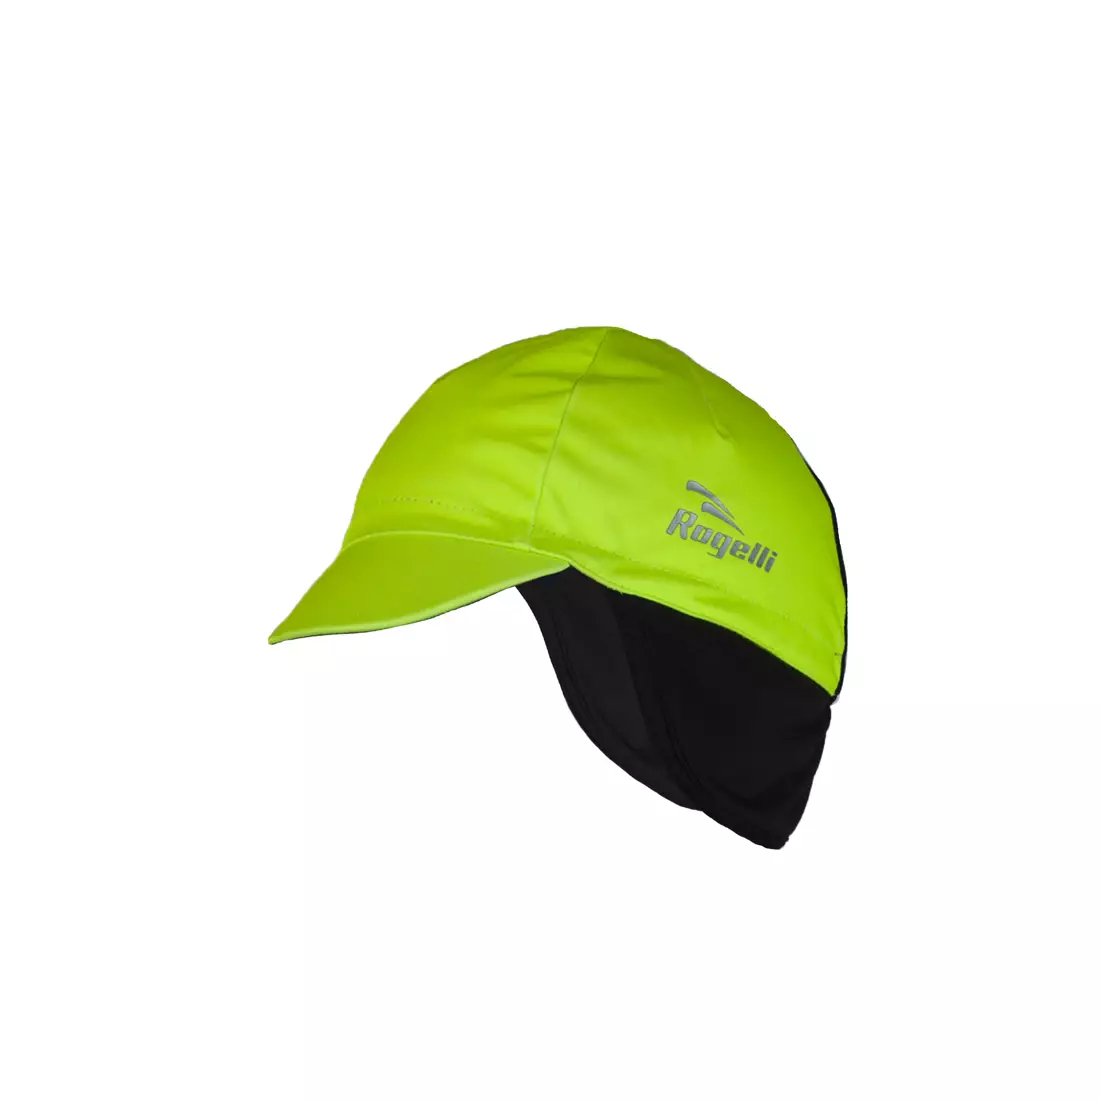 ROGELLI 009.115 SS18 Prottetivo winter cycling cap with a visor, fluor